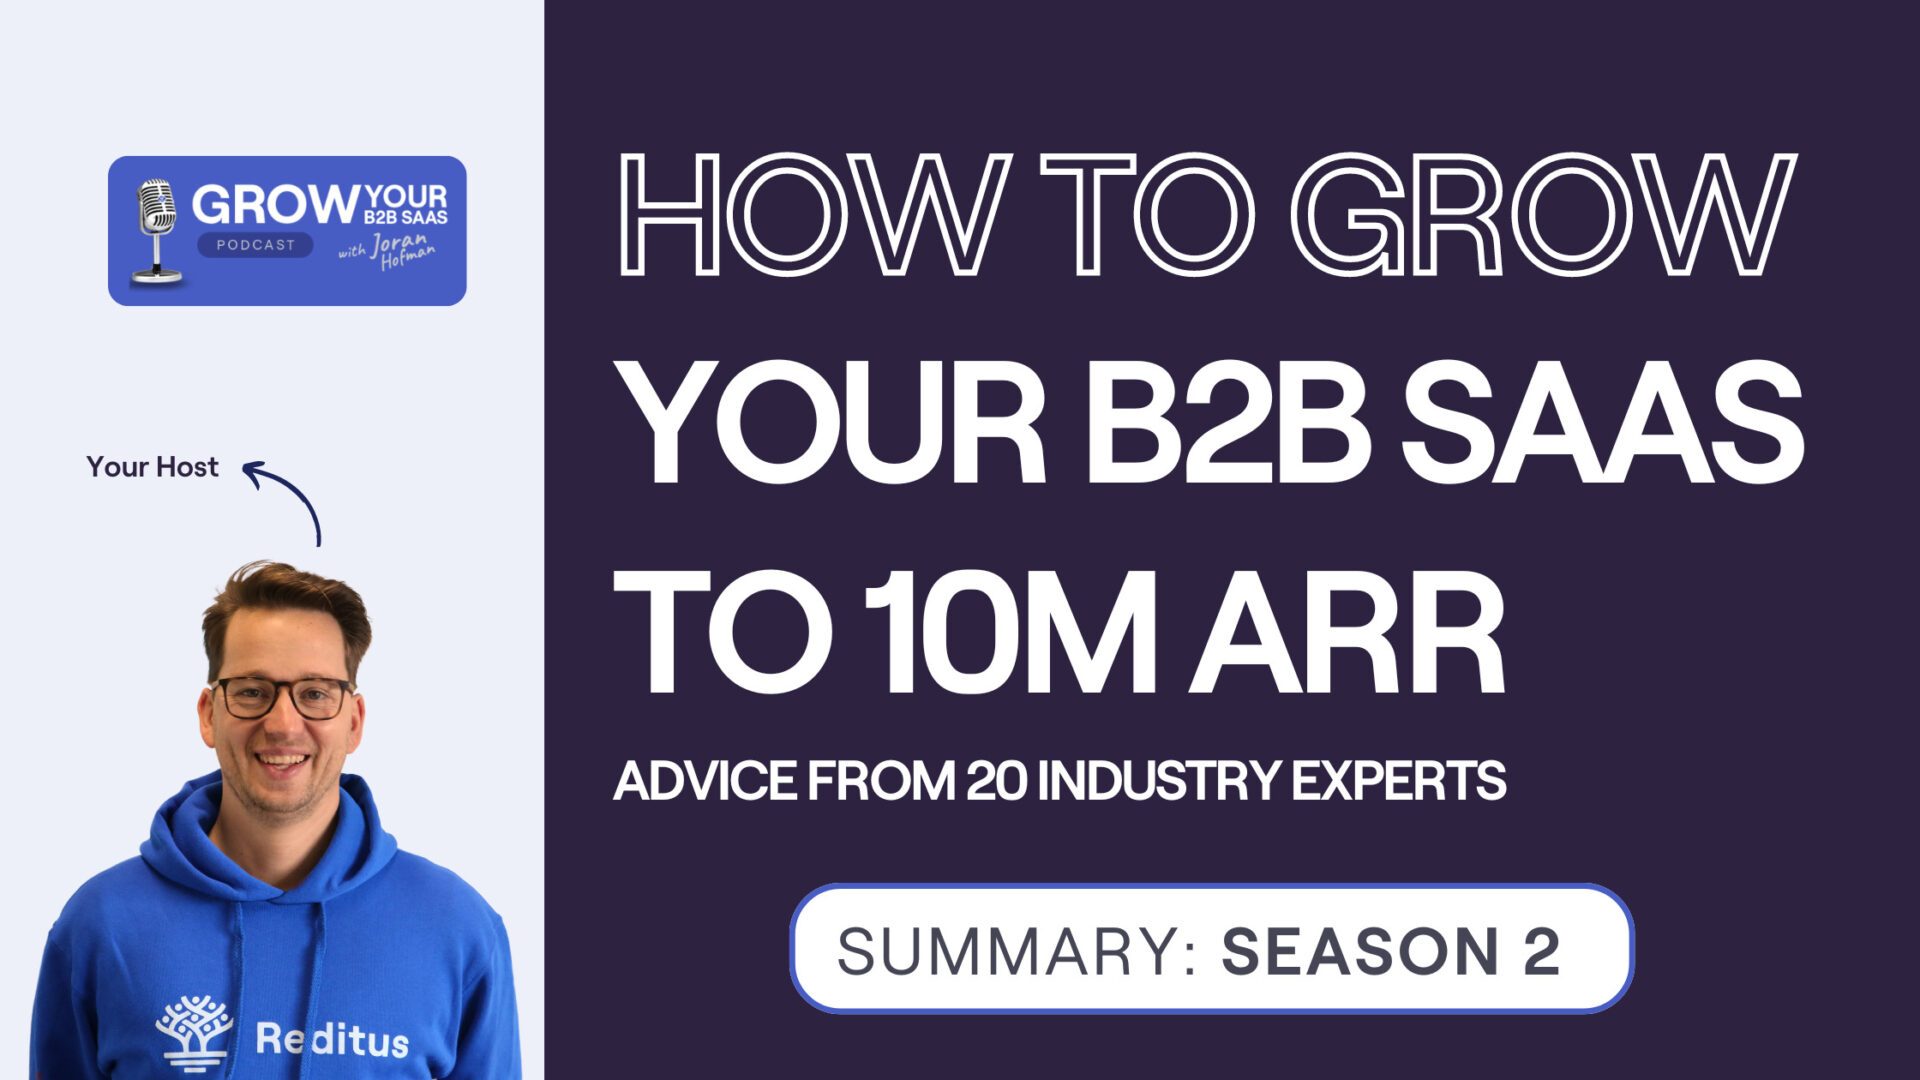 S2E22 – How to grow your B2B SaaS to 10M ARR? Advice from 20 experts.